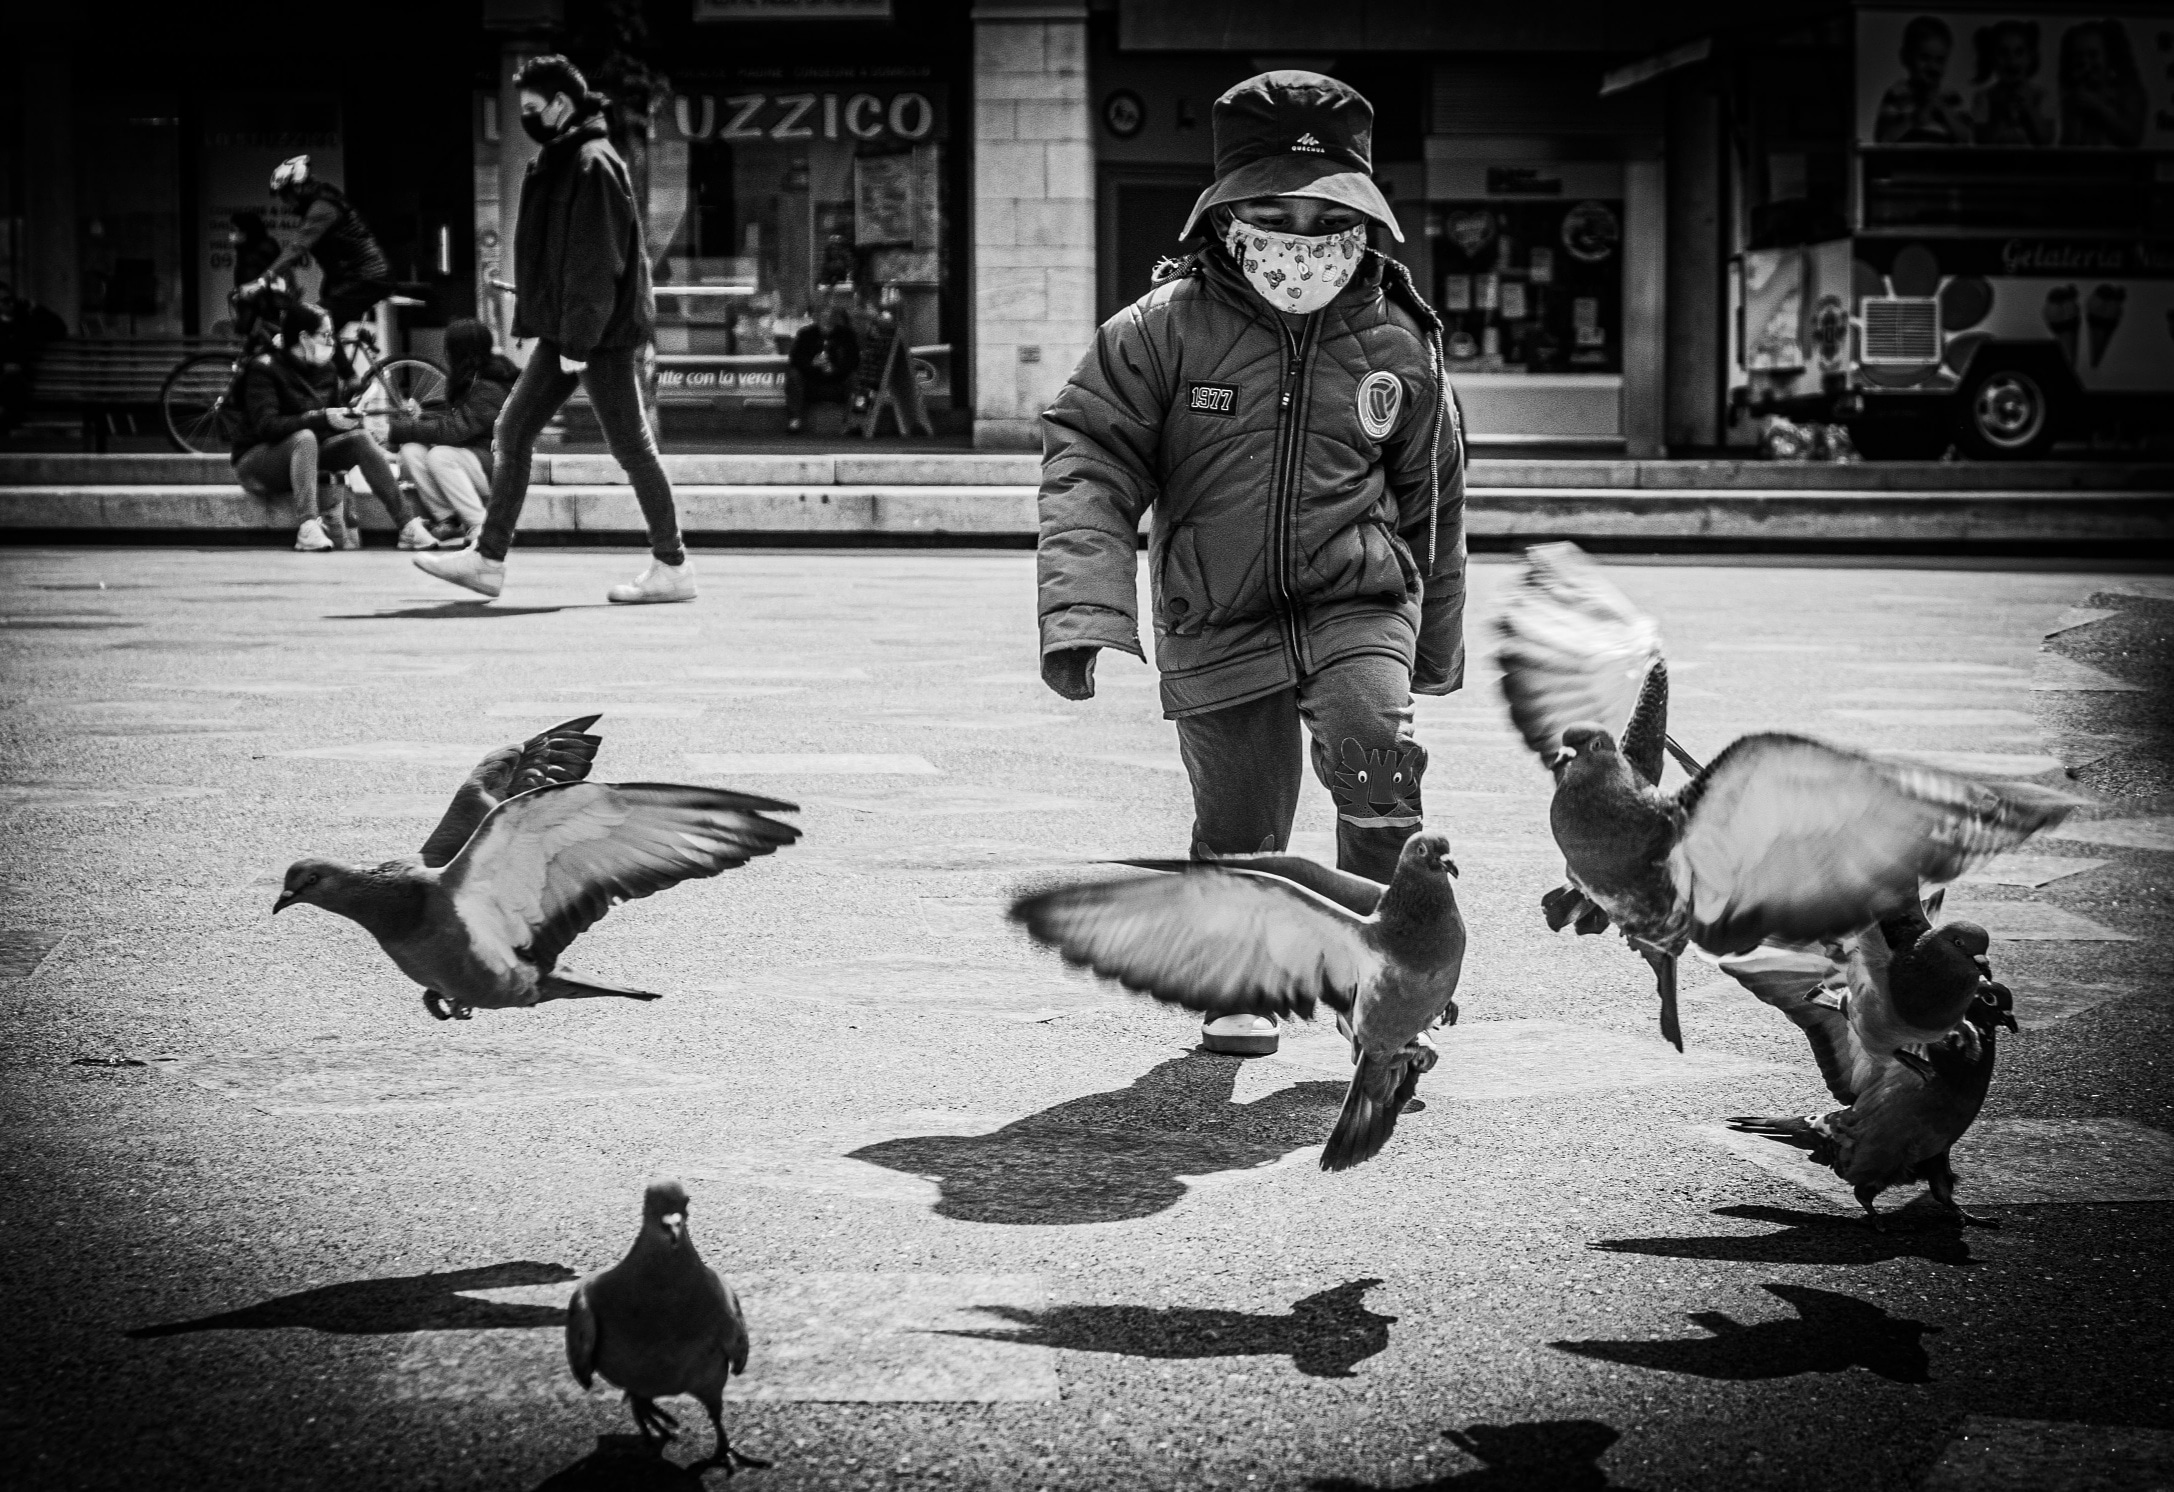 scaring the pigeons...